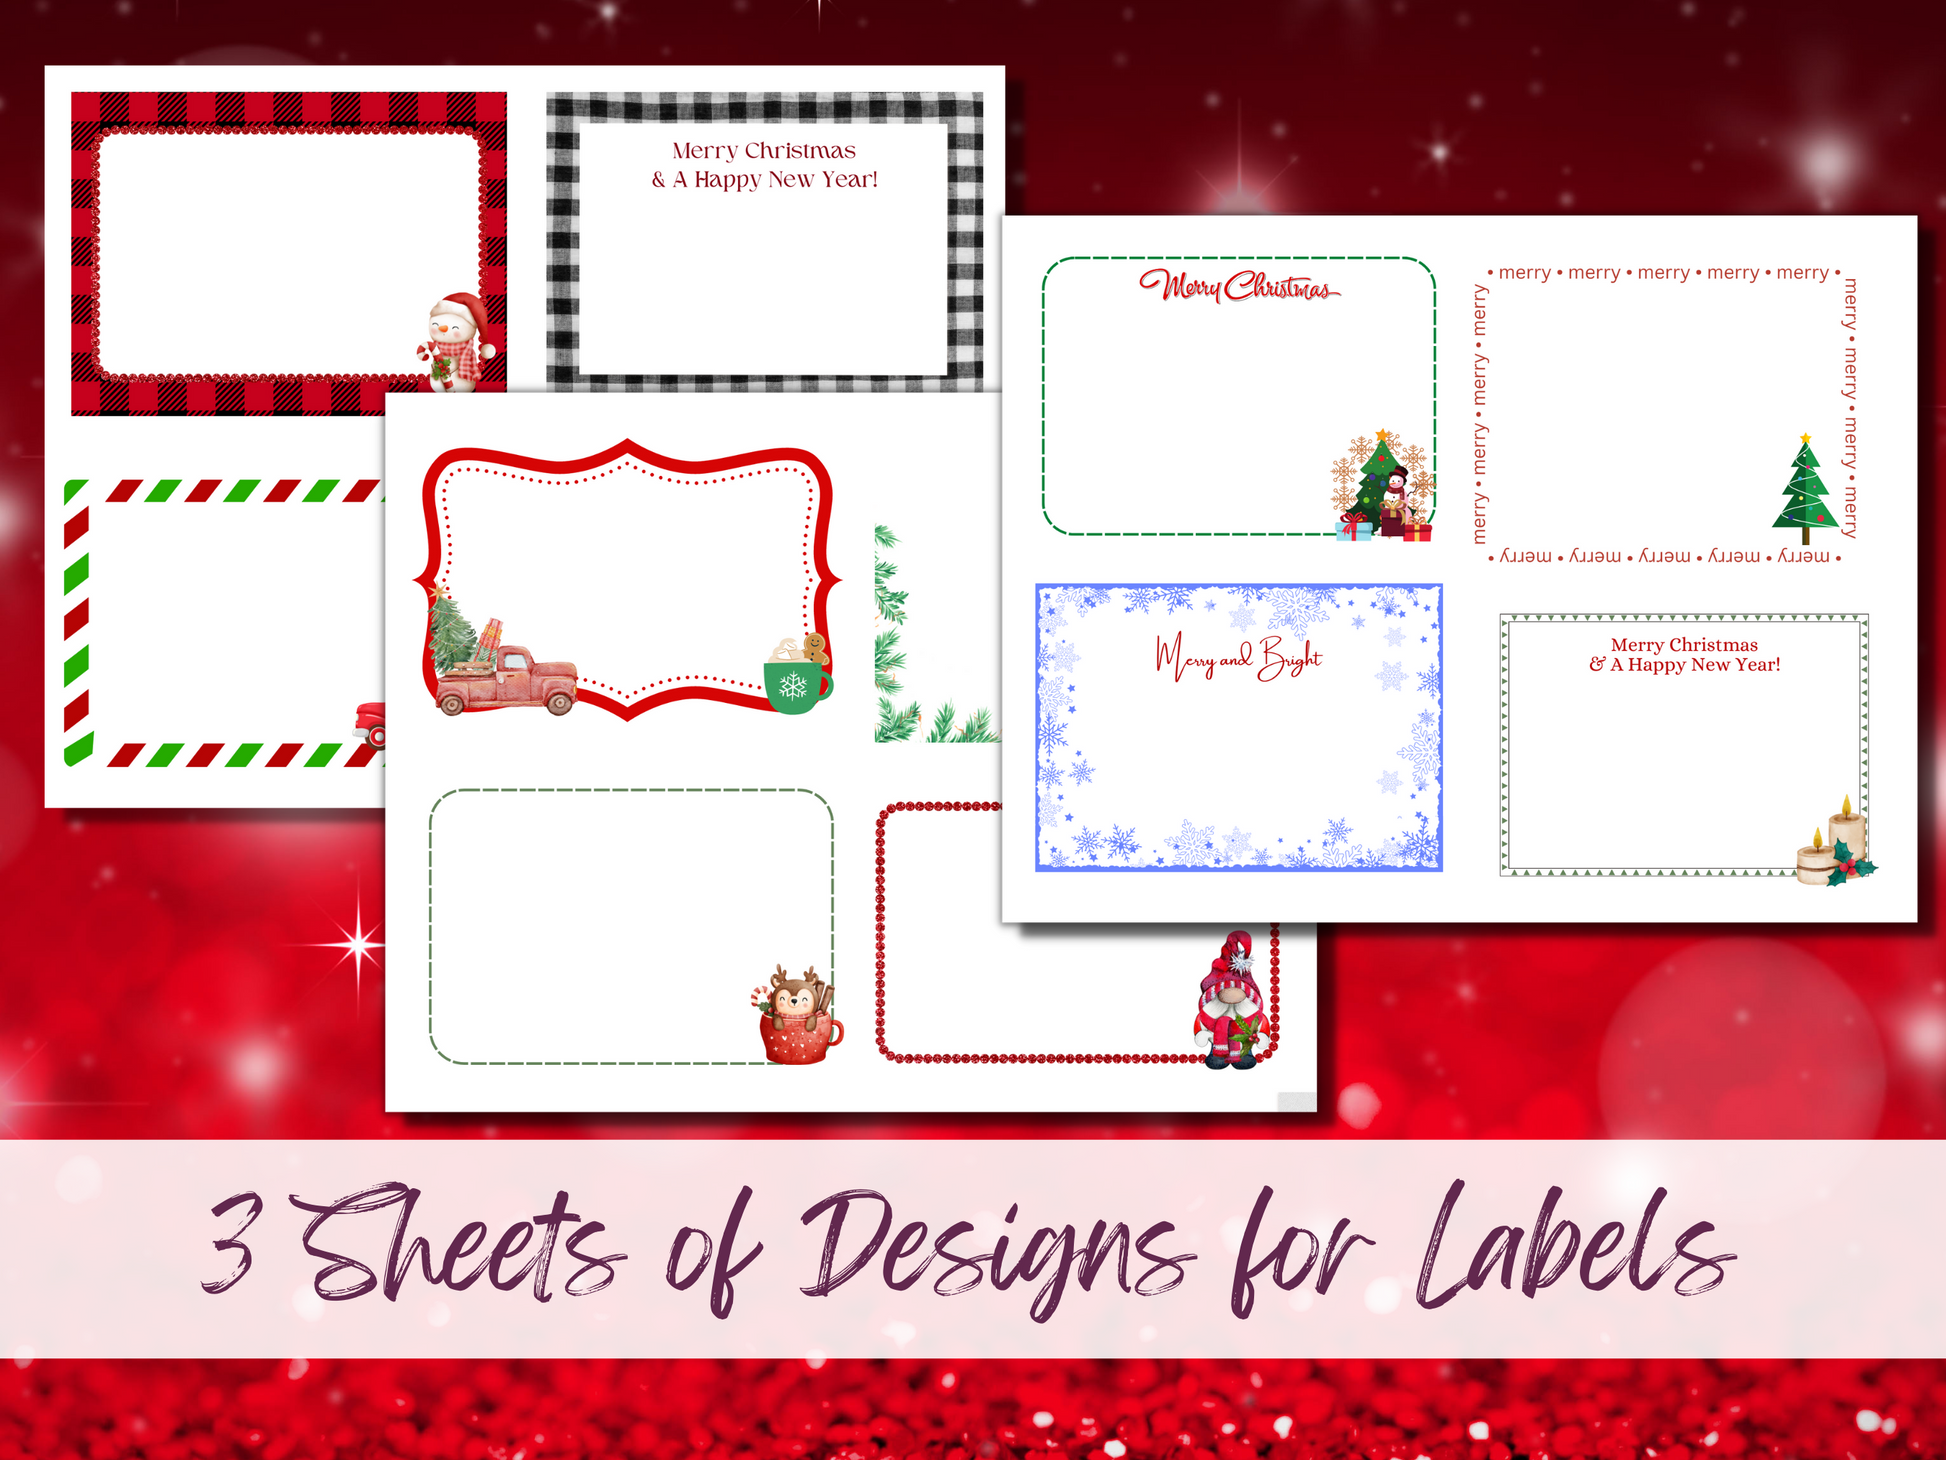 quilt labels for Christmas, 3 label sheets to print